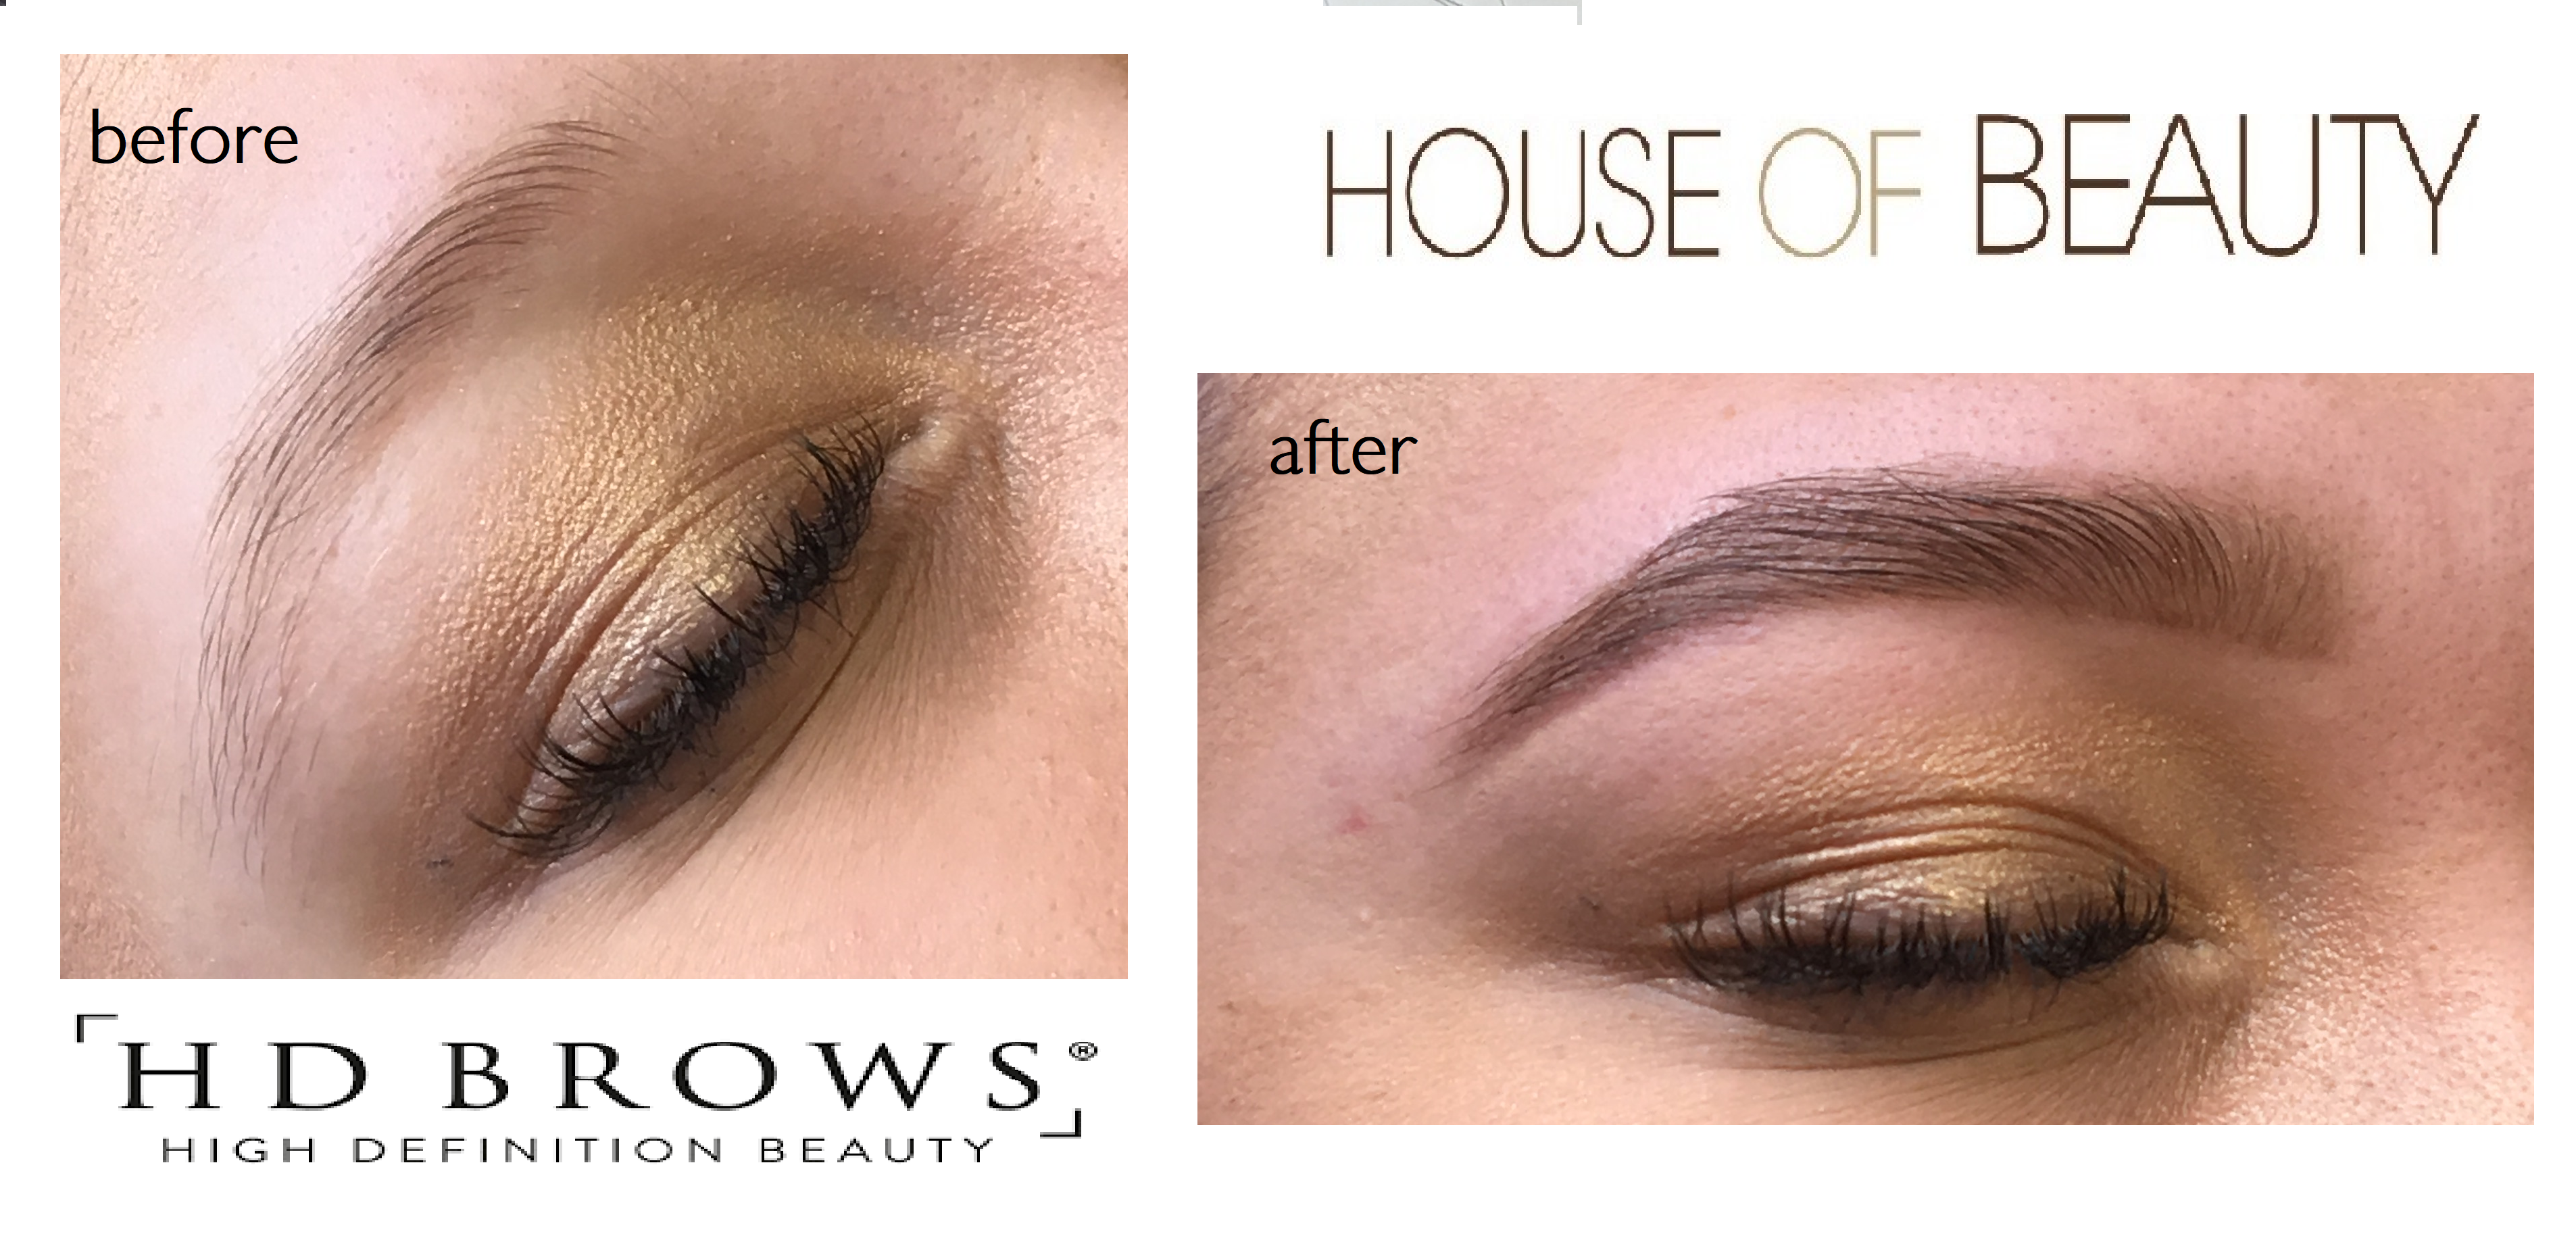 House of beauty HD brows